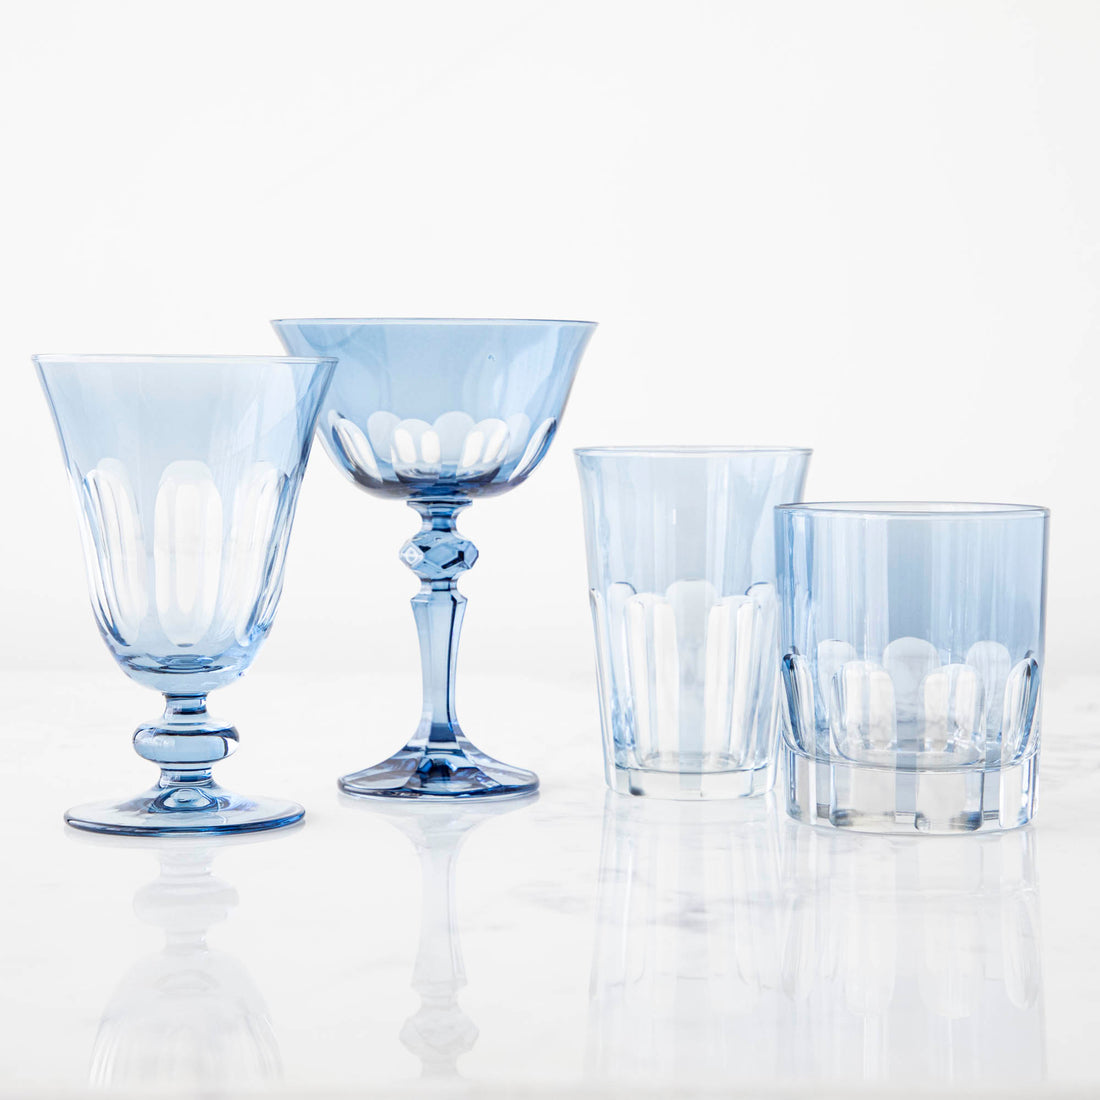 A set of four Rialto Thistle (Light Blue) Glasses by SIR/MADAM on a reflective surface.